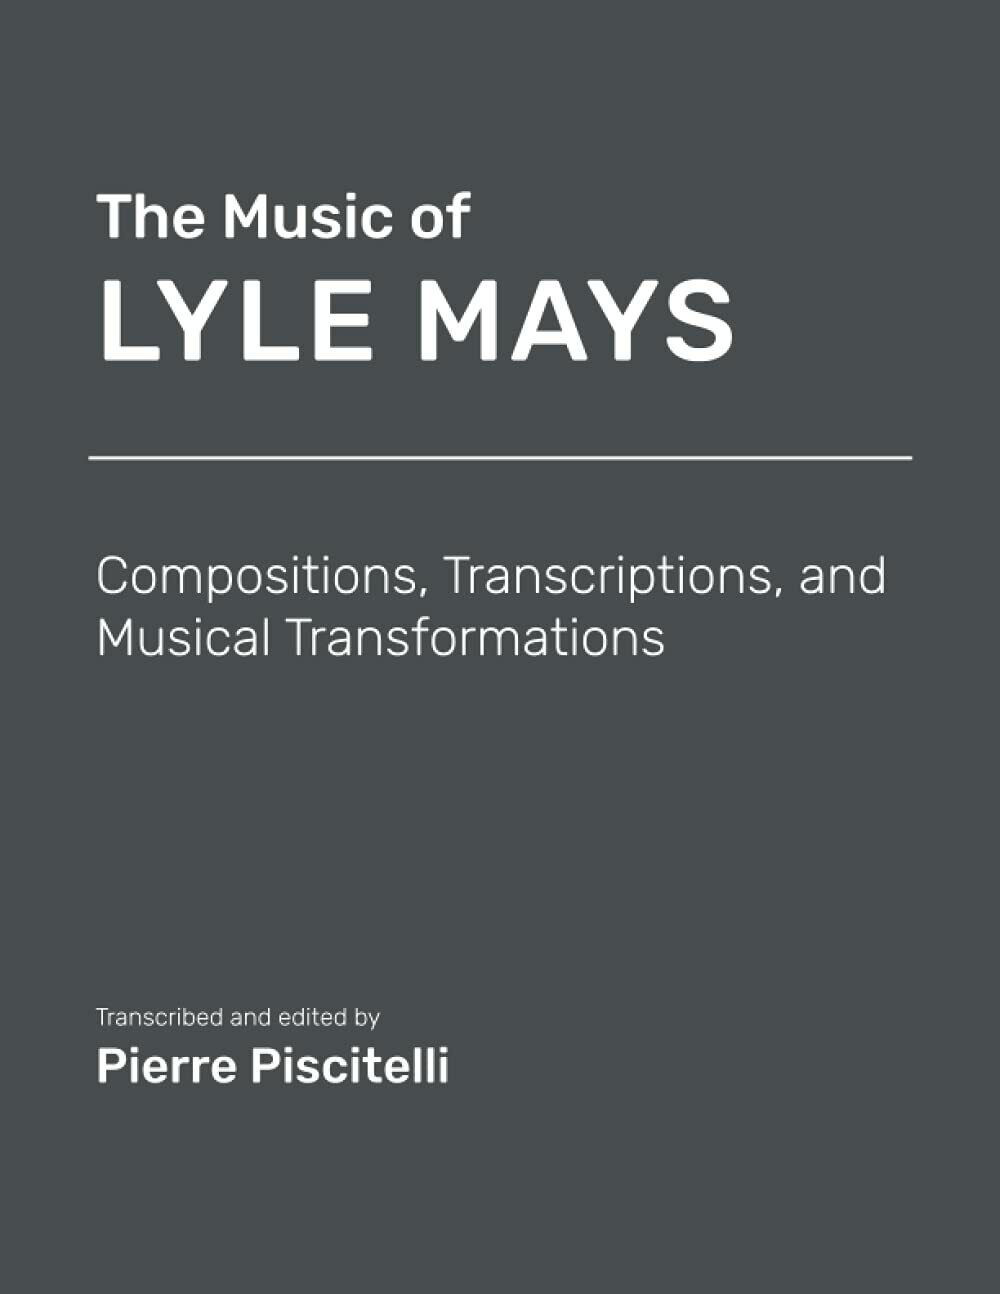 The Music of Lyle Mays: Compositions, Transcriptions and Musical Transformations